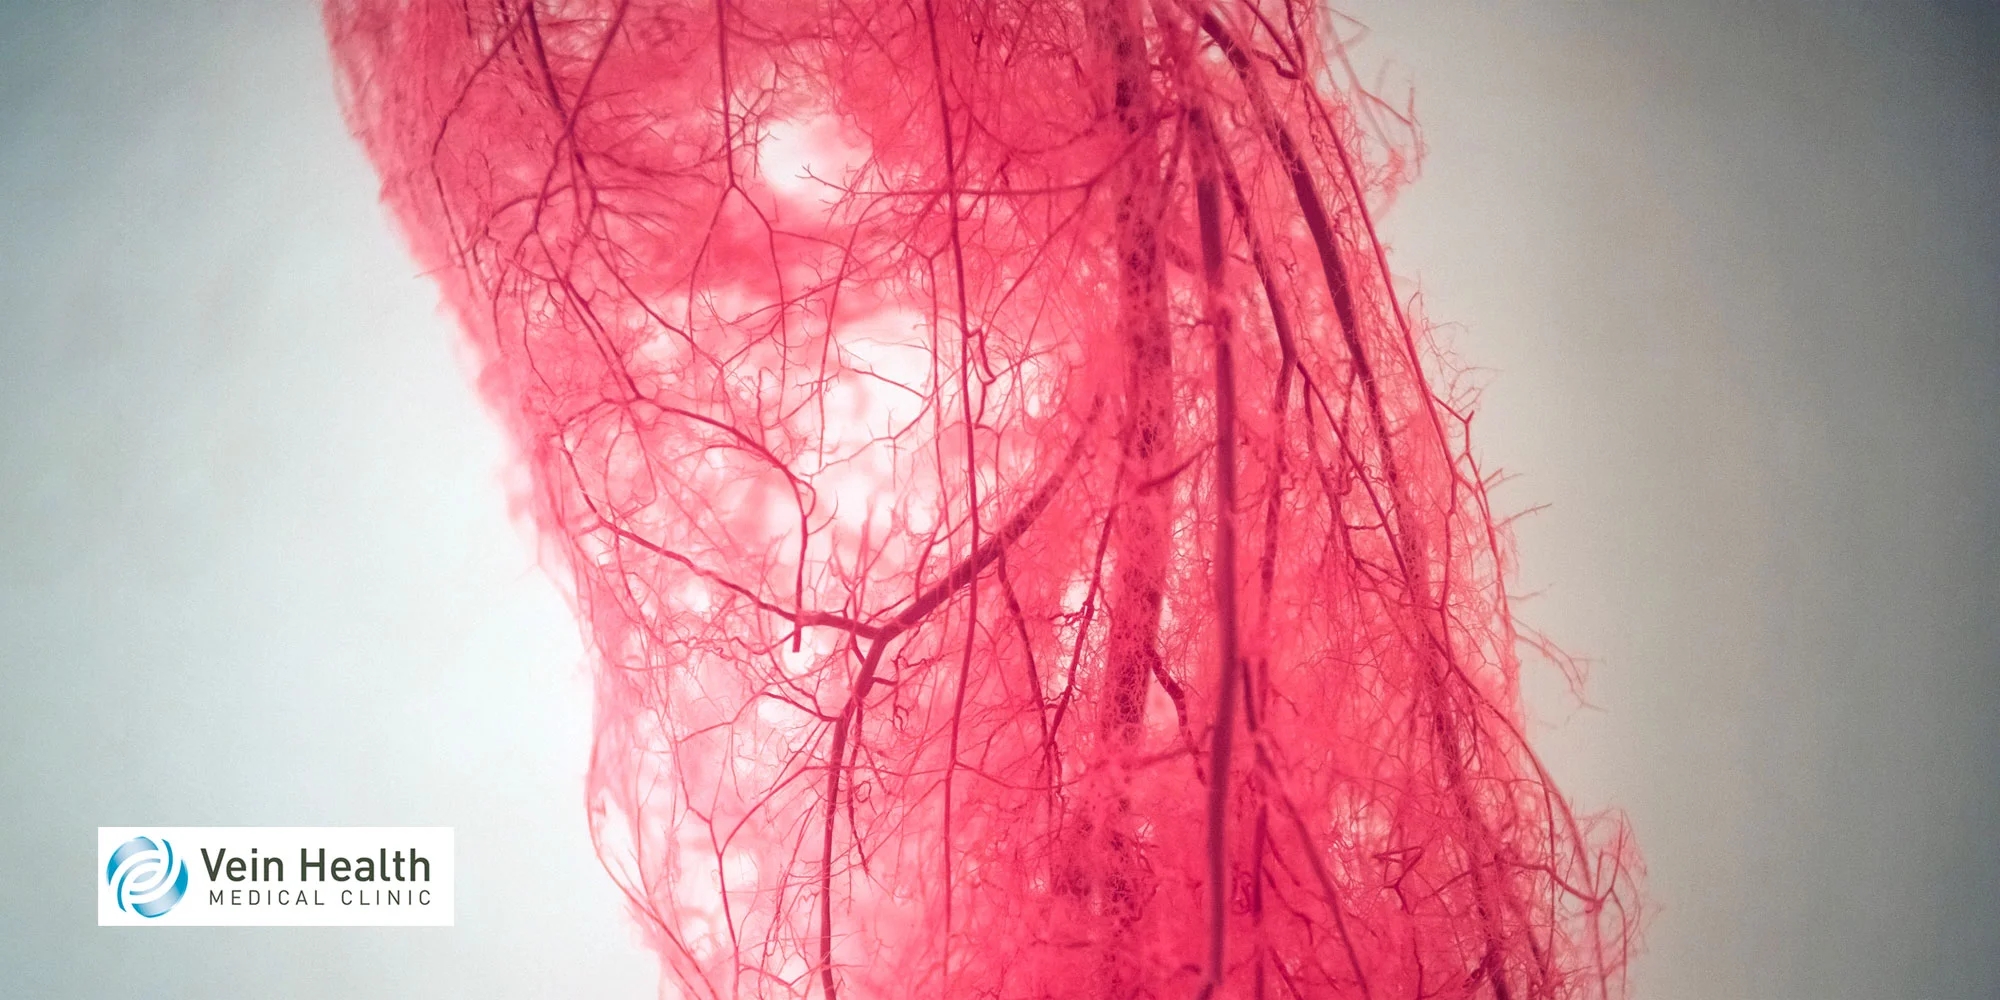 A close up of a blood vessels in the leg